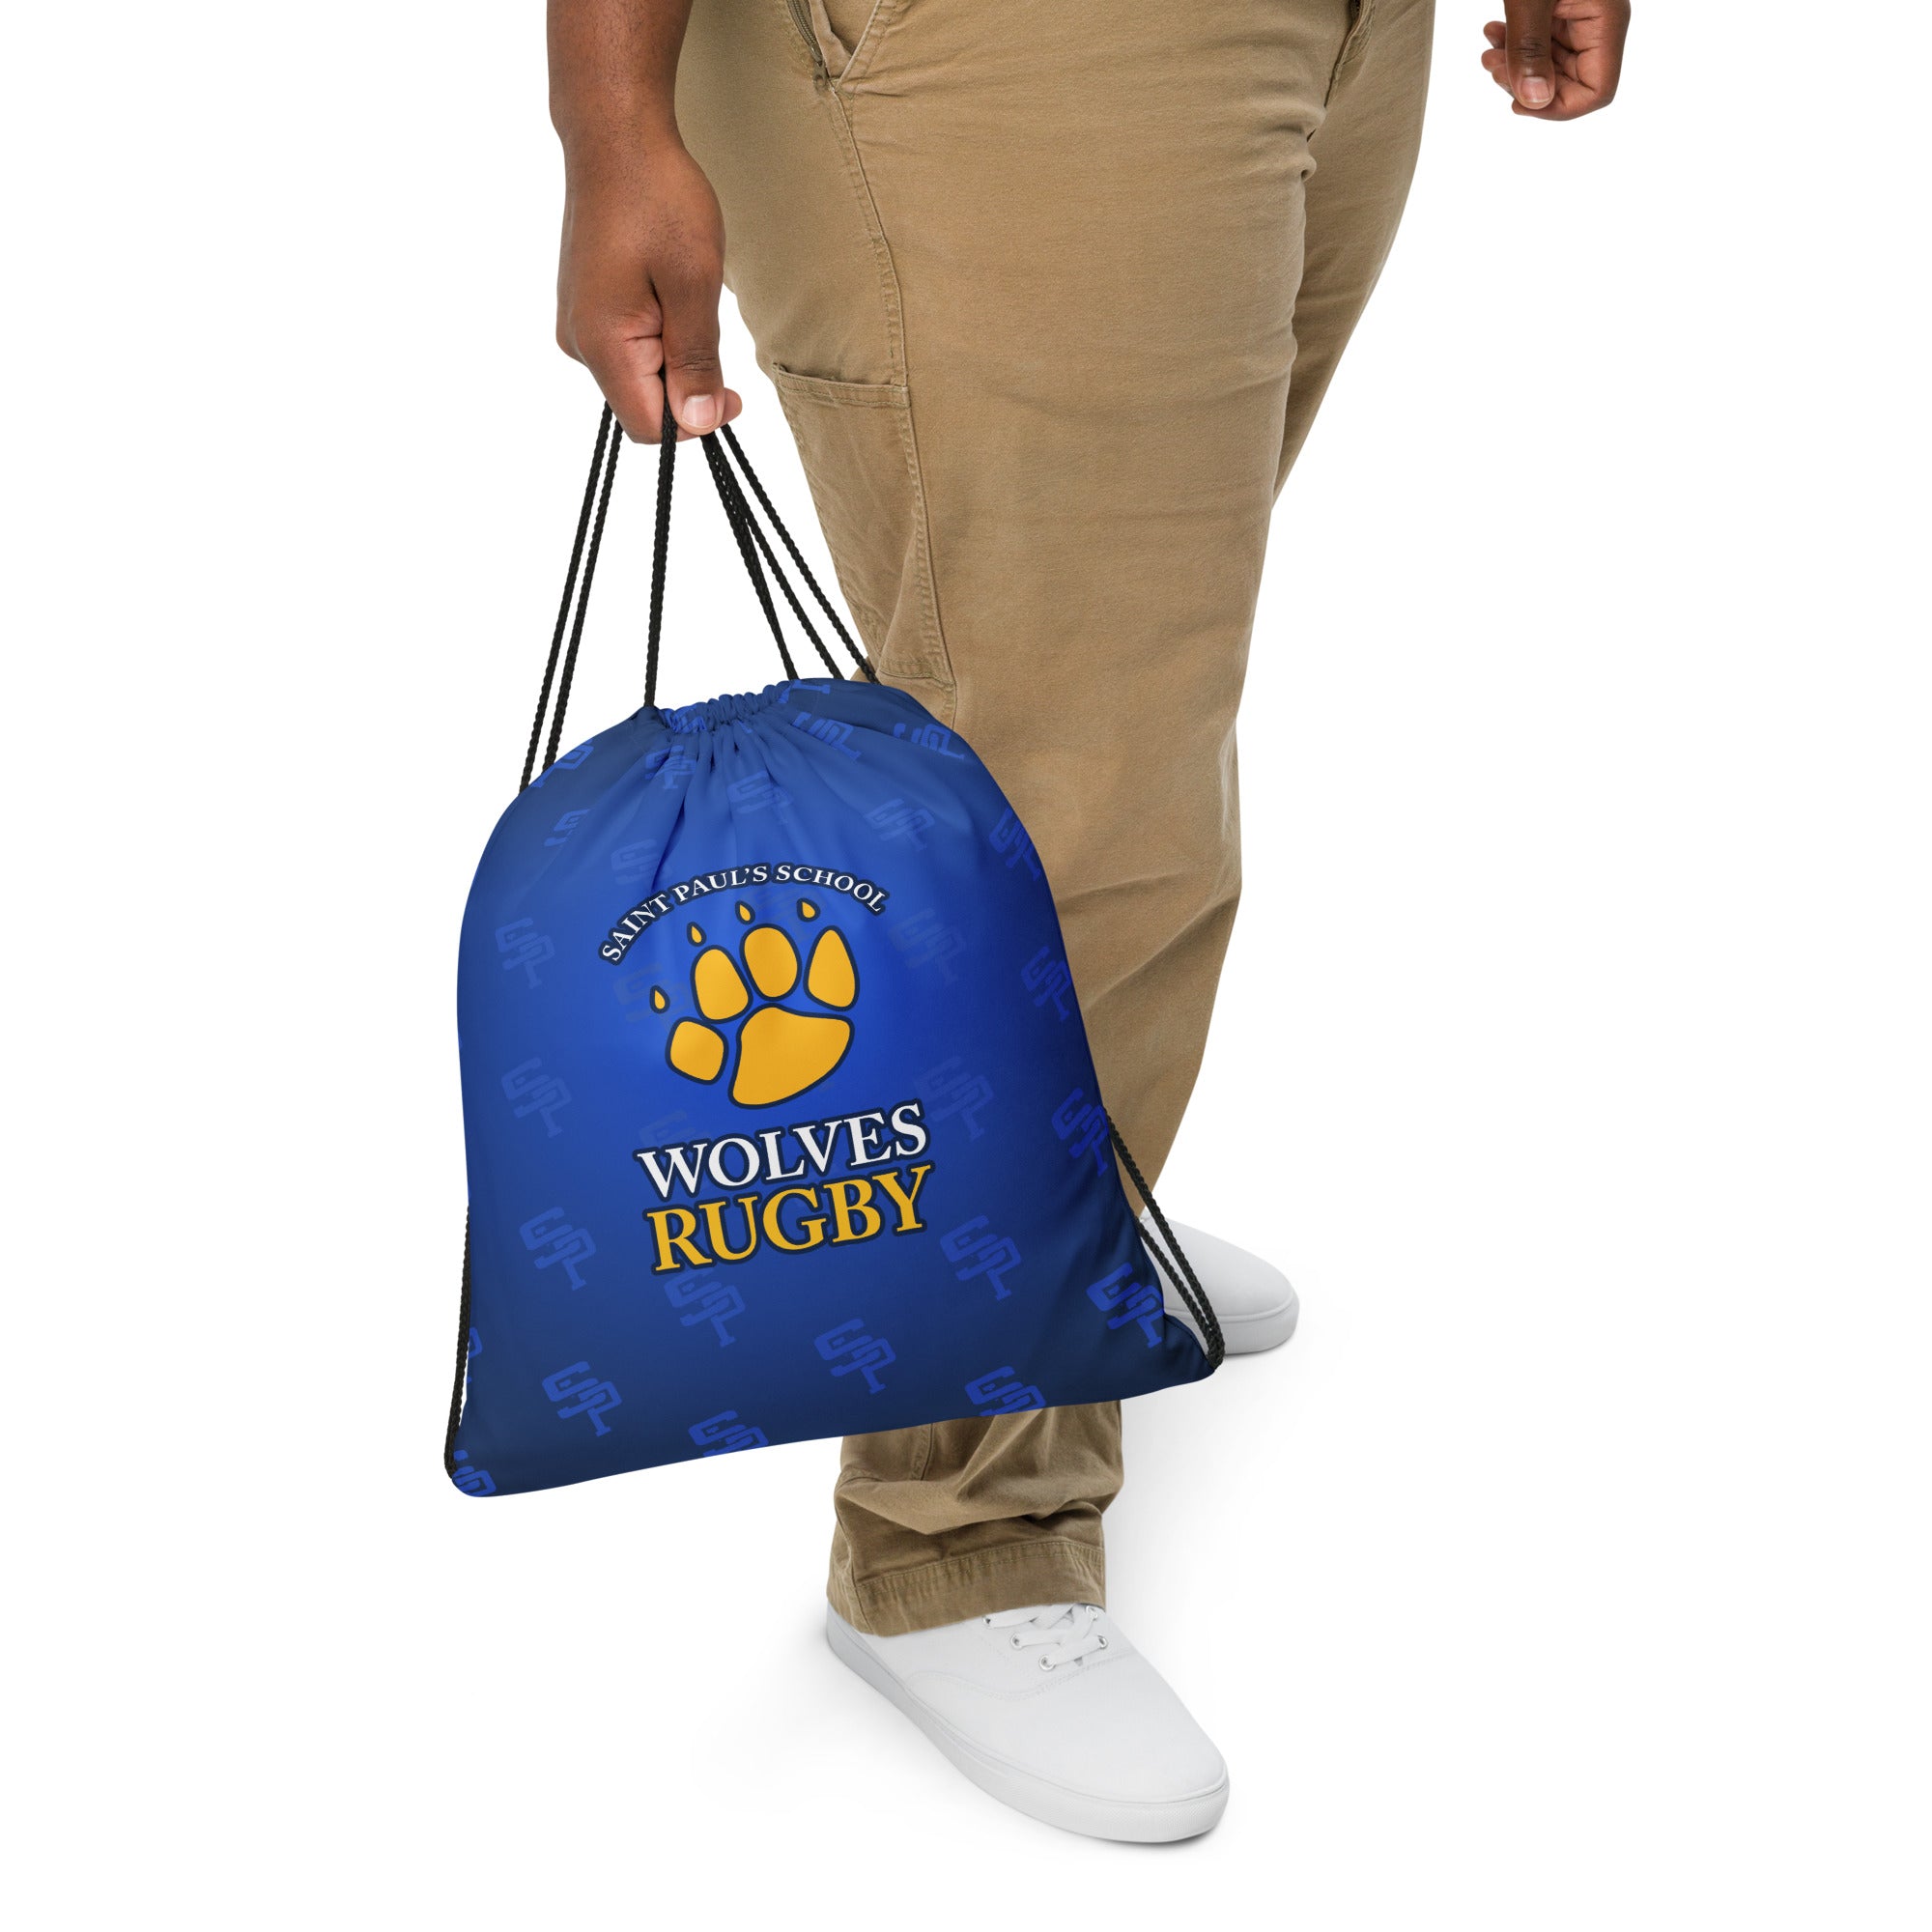 Rugby Imports SPS Wolves Rugby Drawstring bag